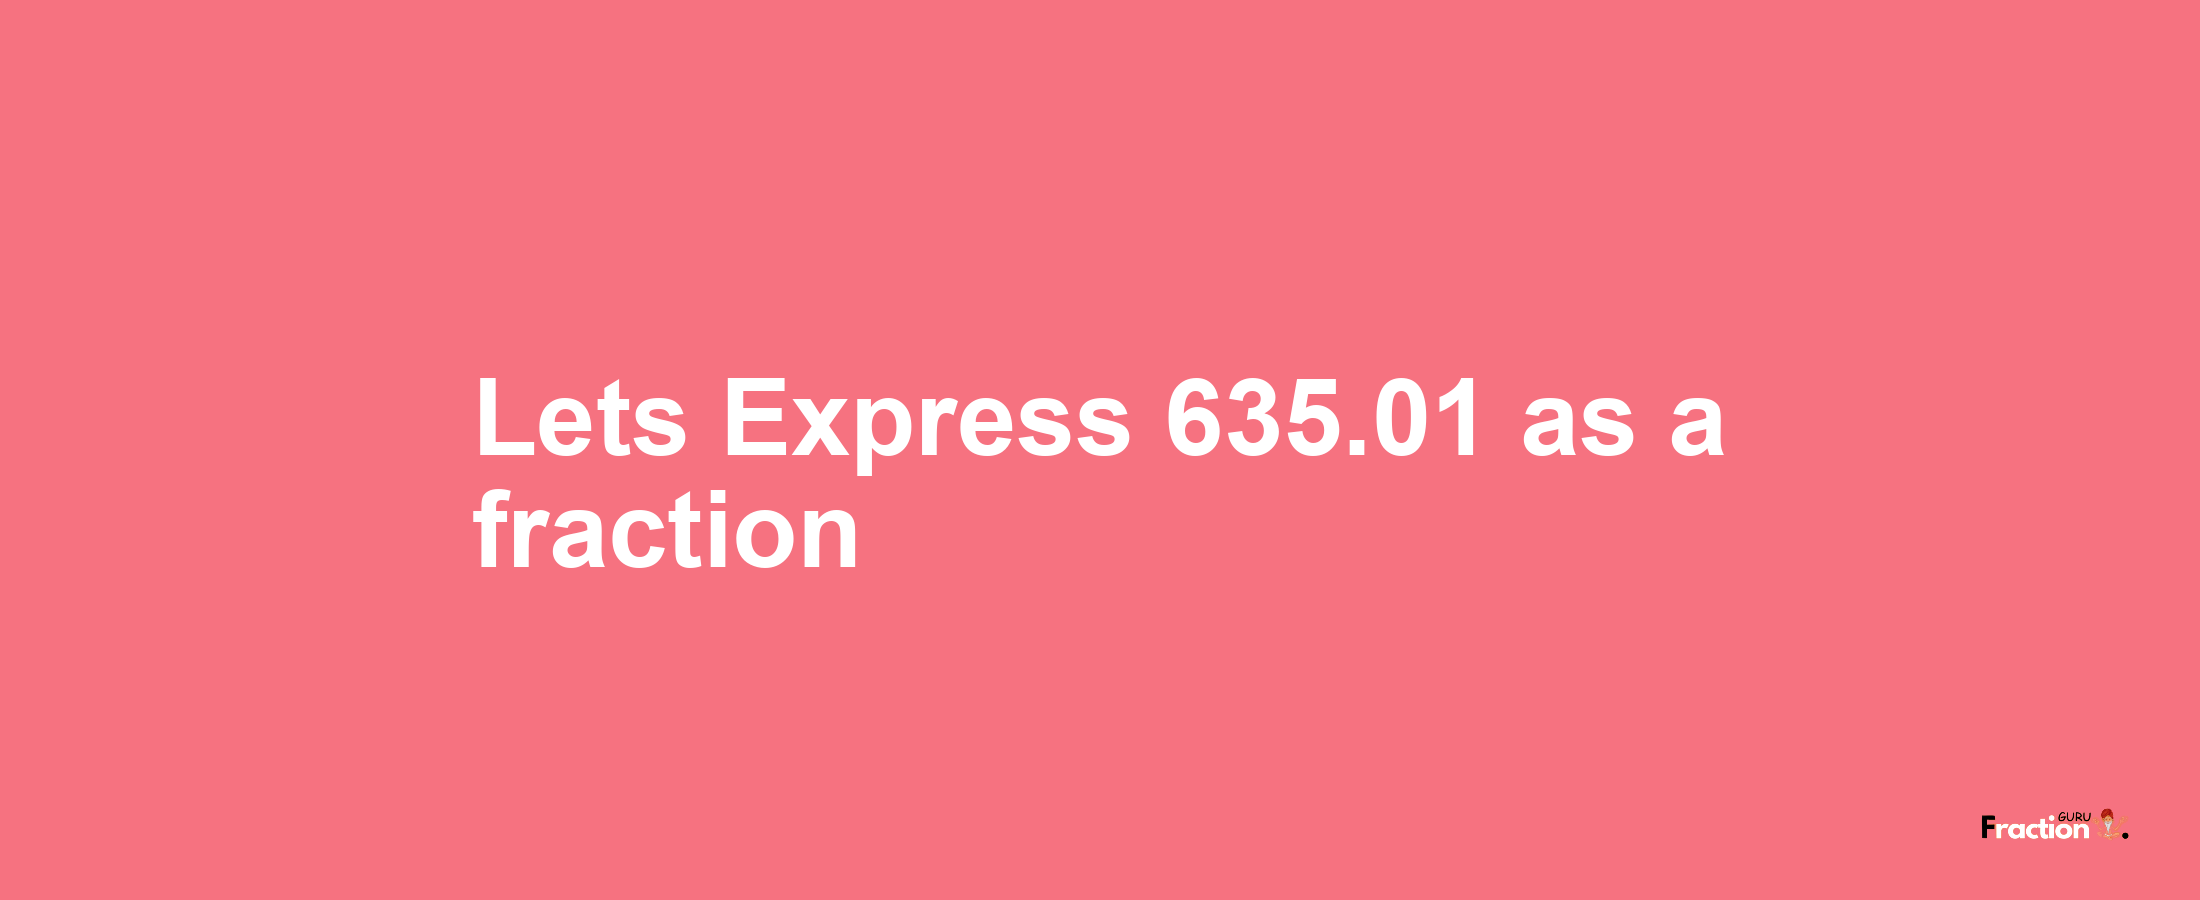 Lets Express 635.01 as afraction